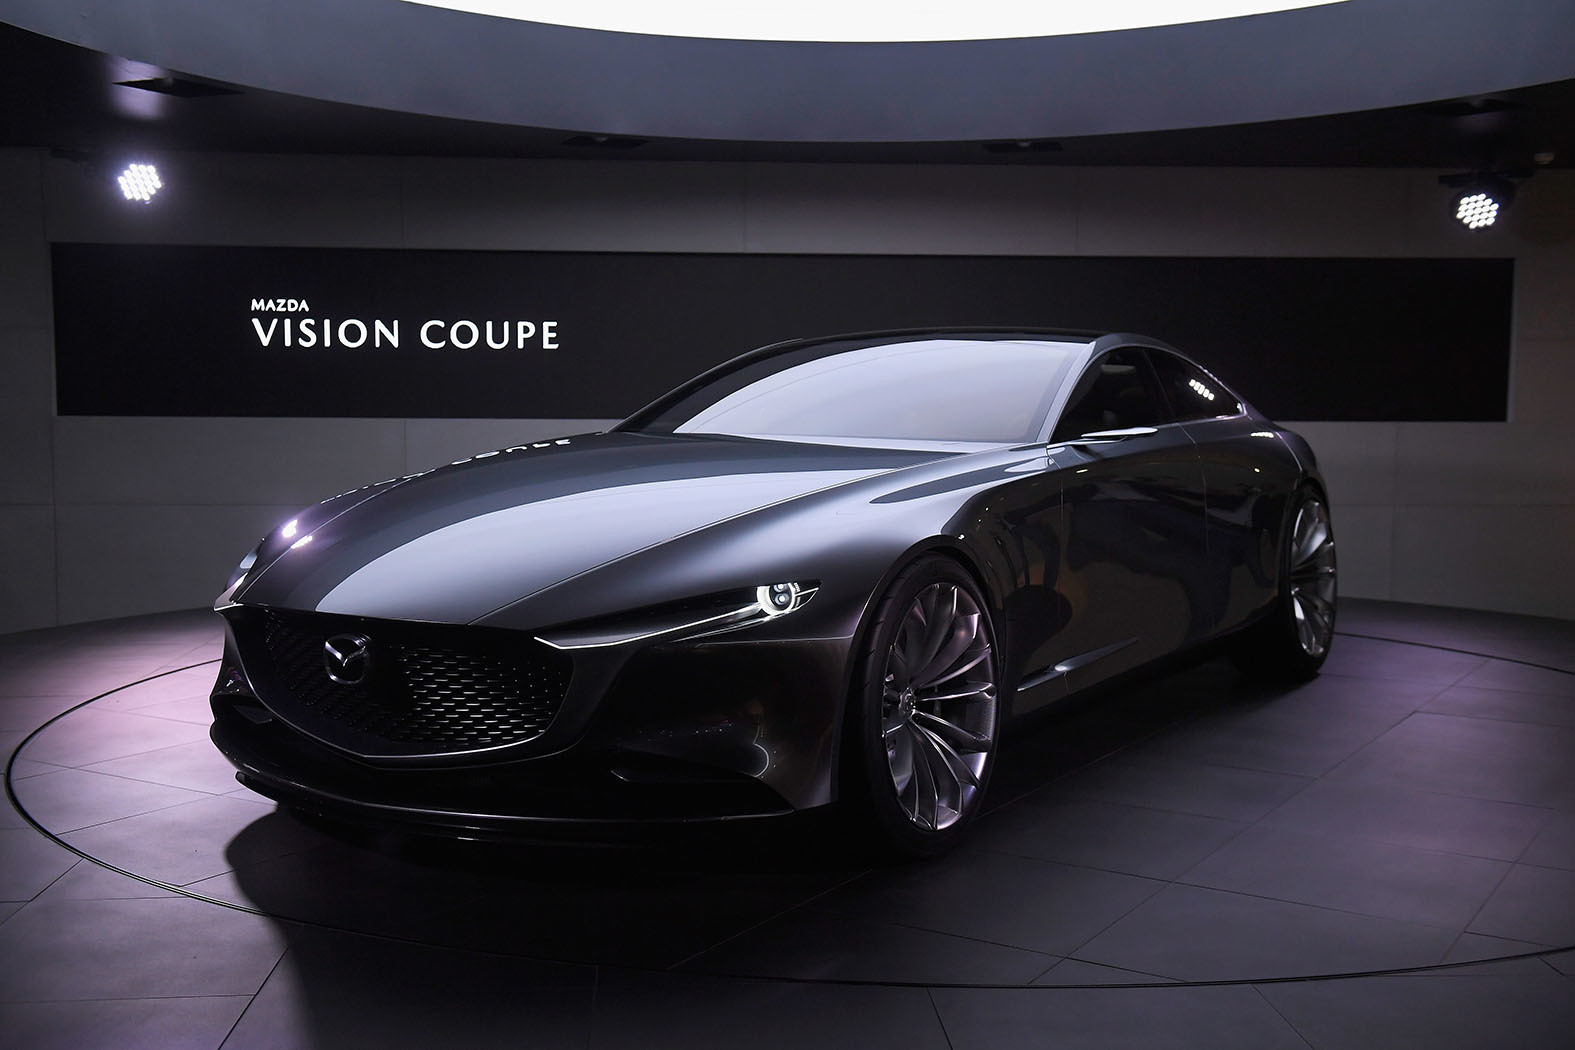 VISION COUPE